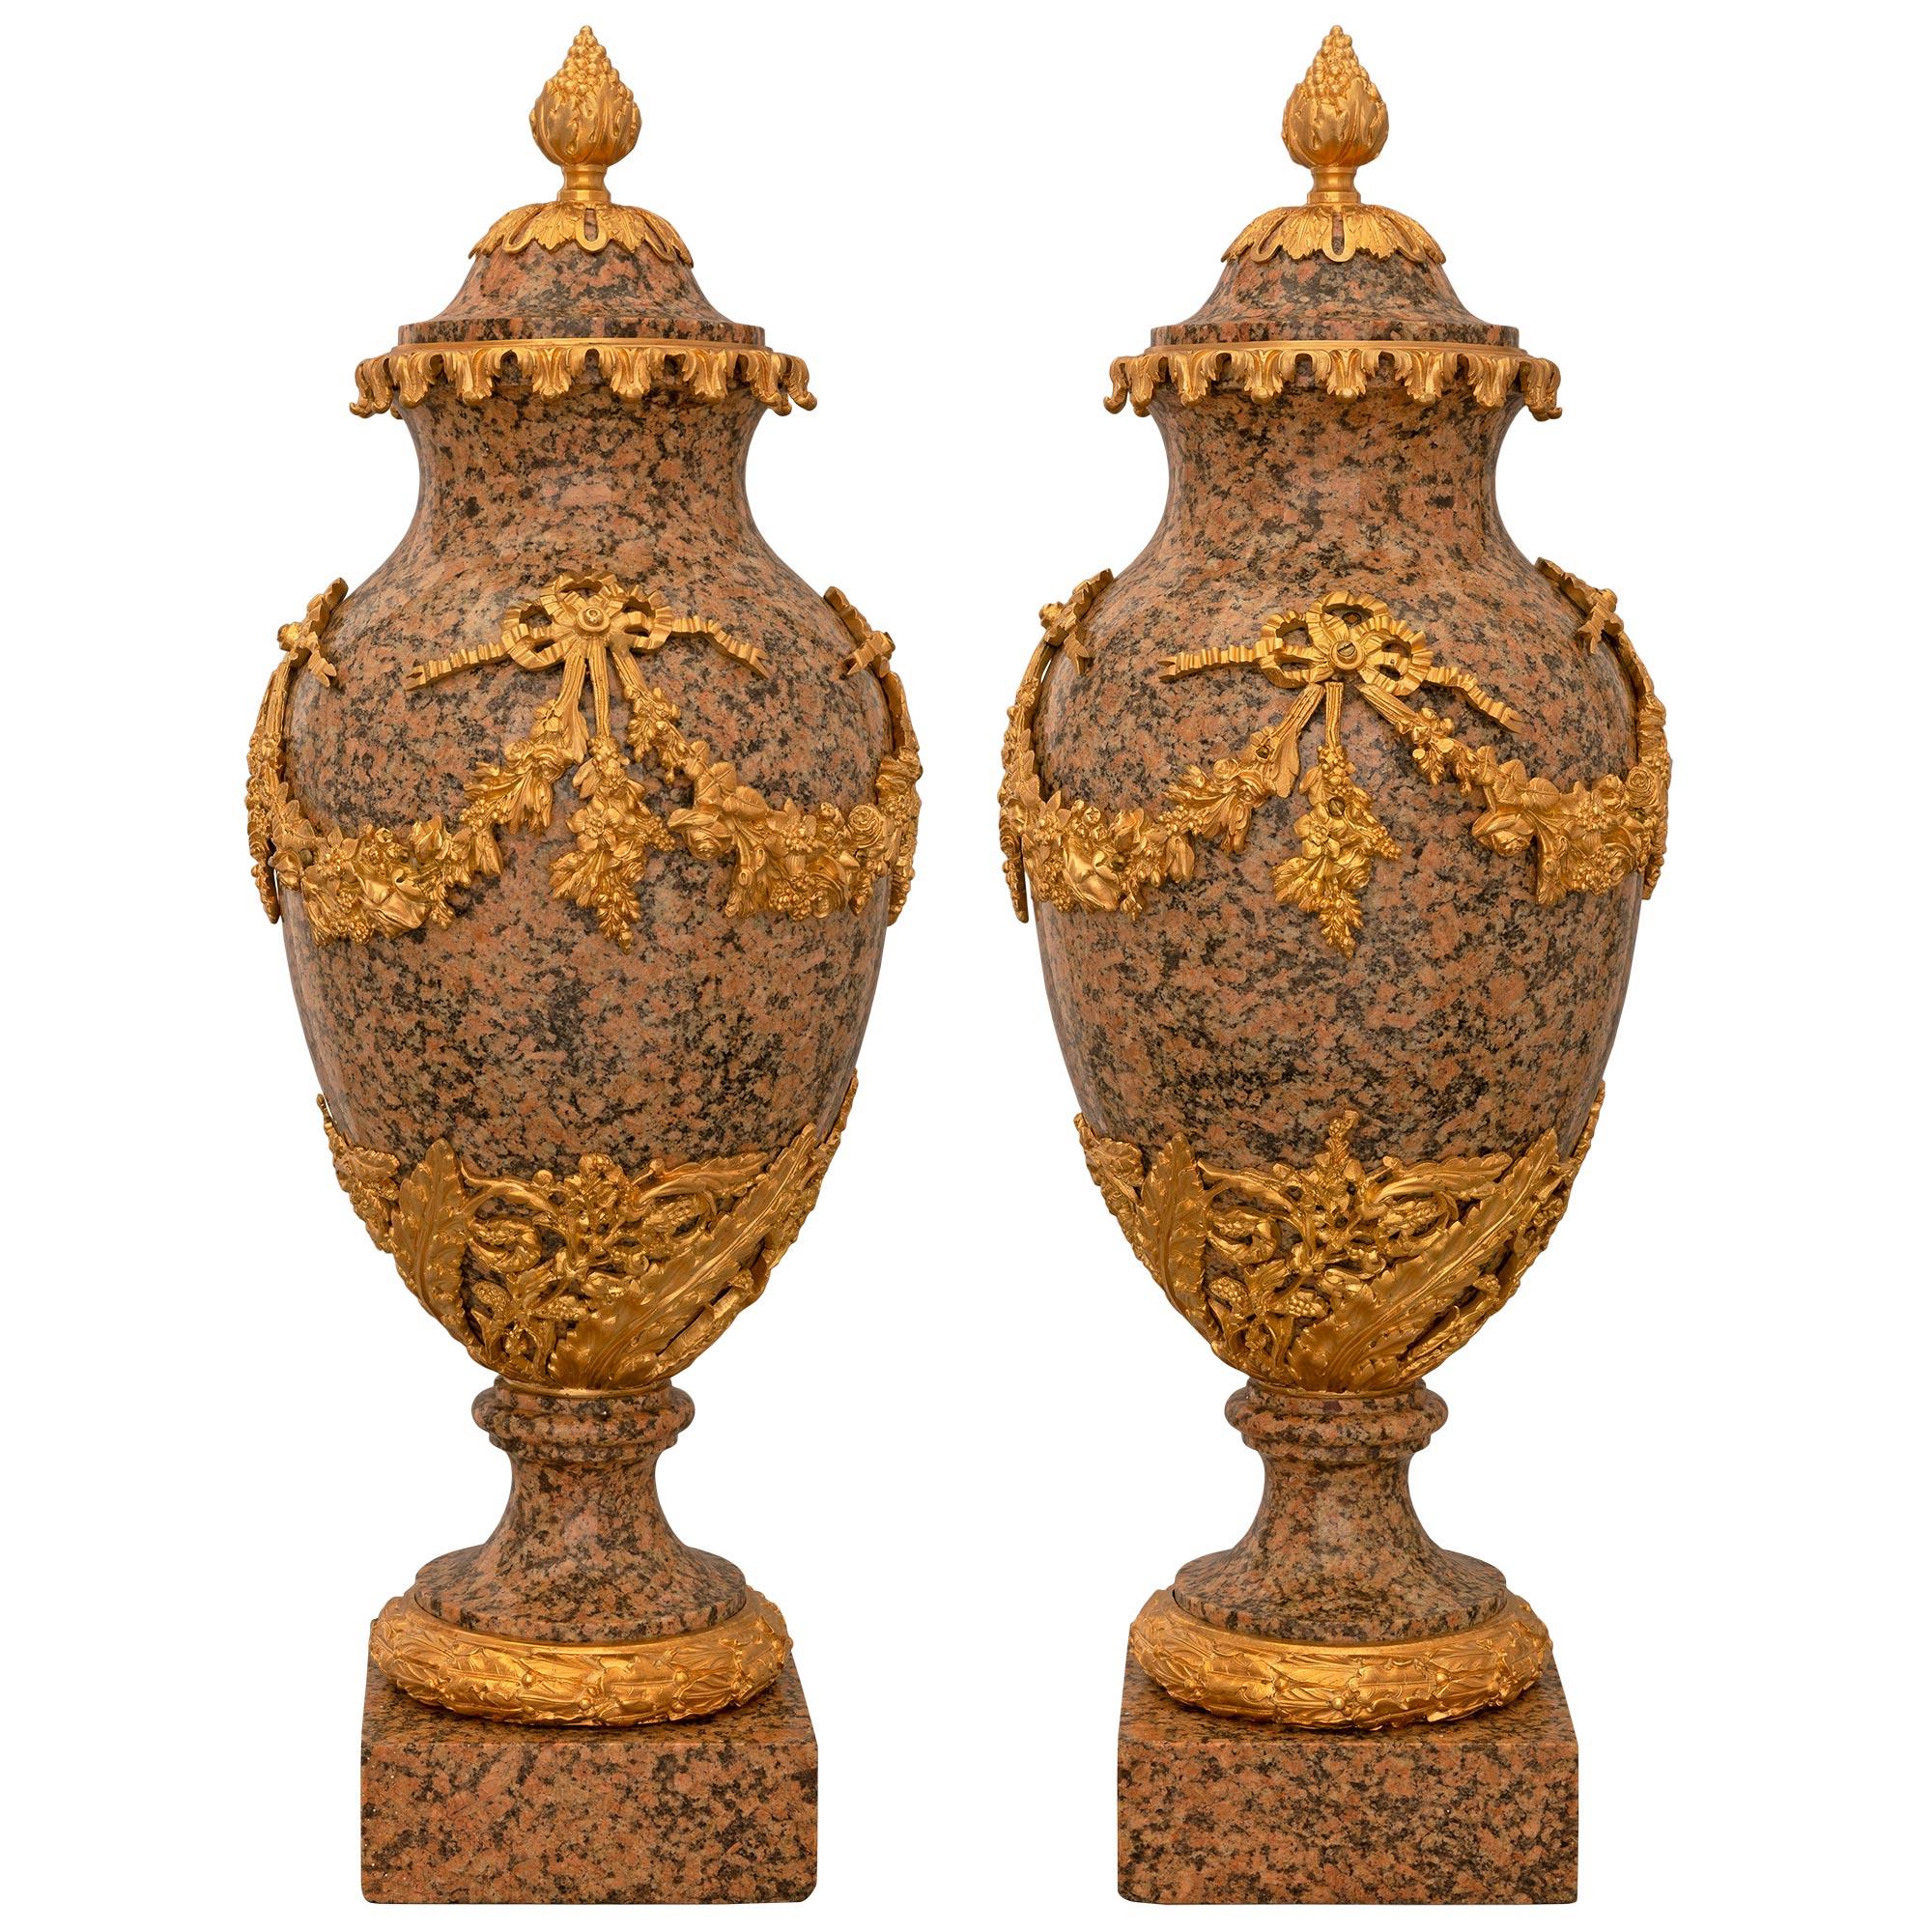 A spectacular and most impressive large scaled pair of 19th century French Louis XVI st. pink granite and ormolu mounted lidded urns. The urns are raised by a square base below a berried laurel ormolu band. The socles are below a richly chased